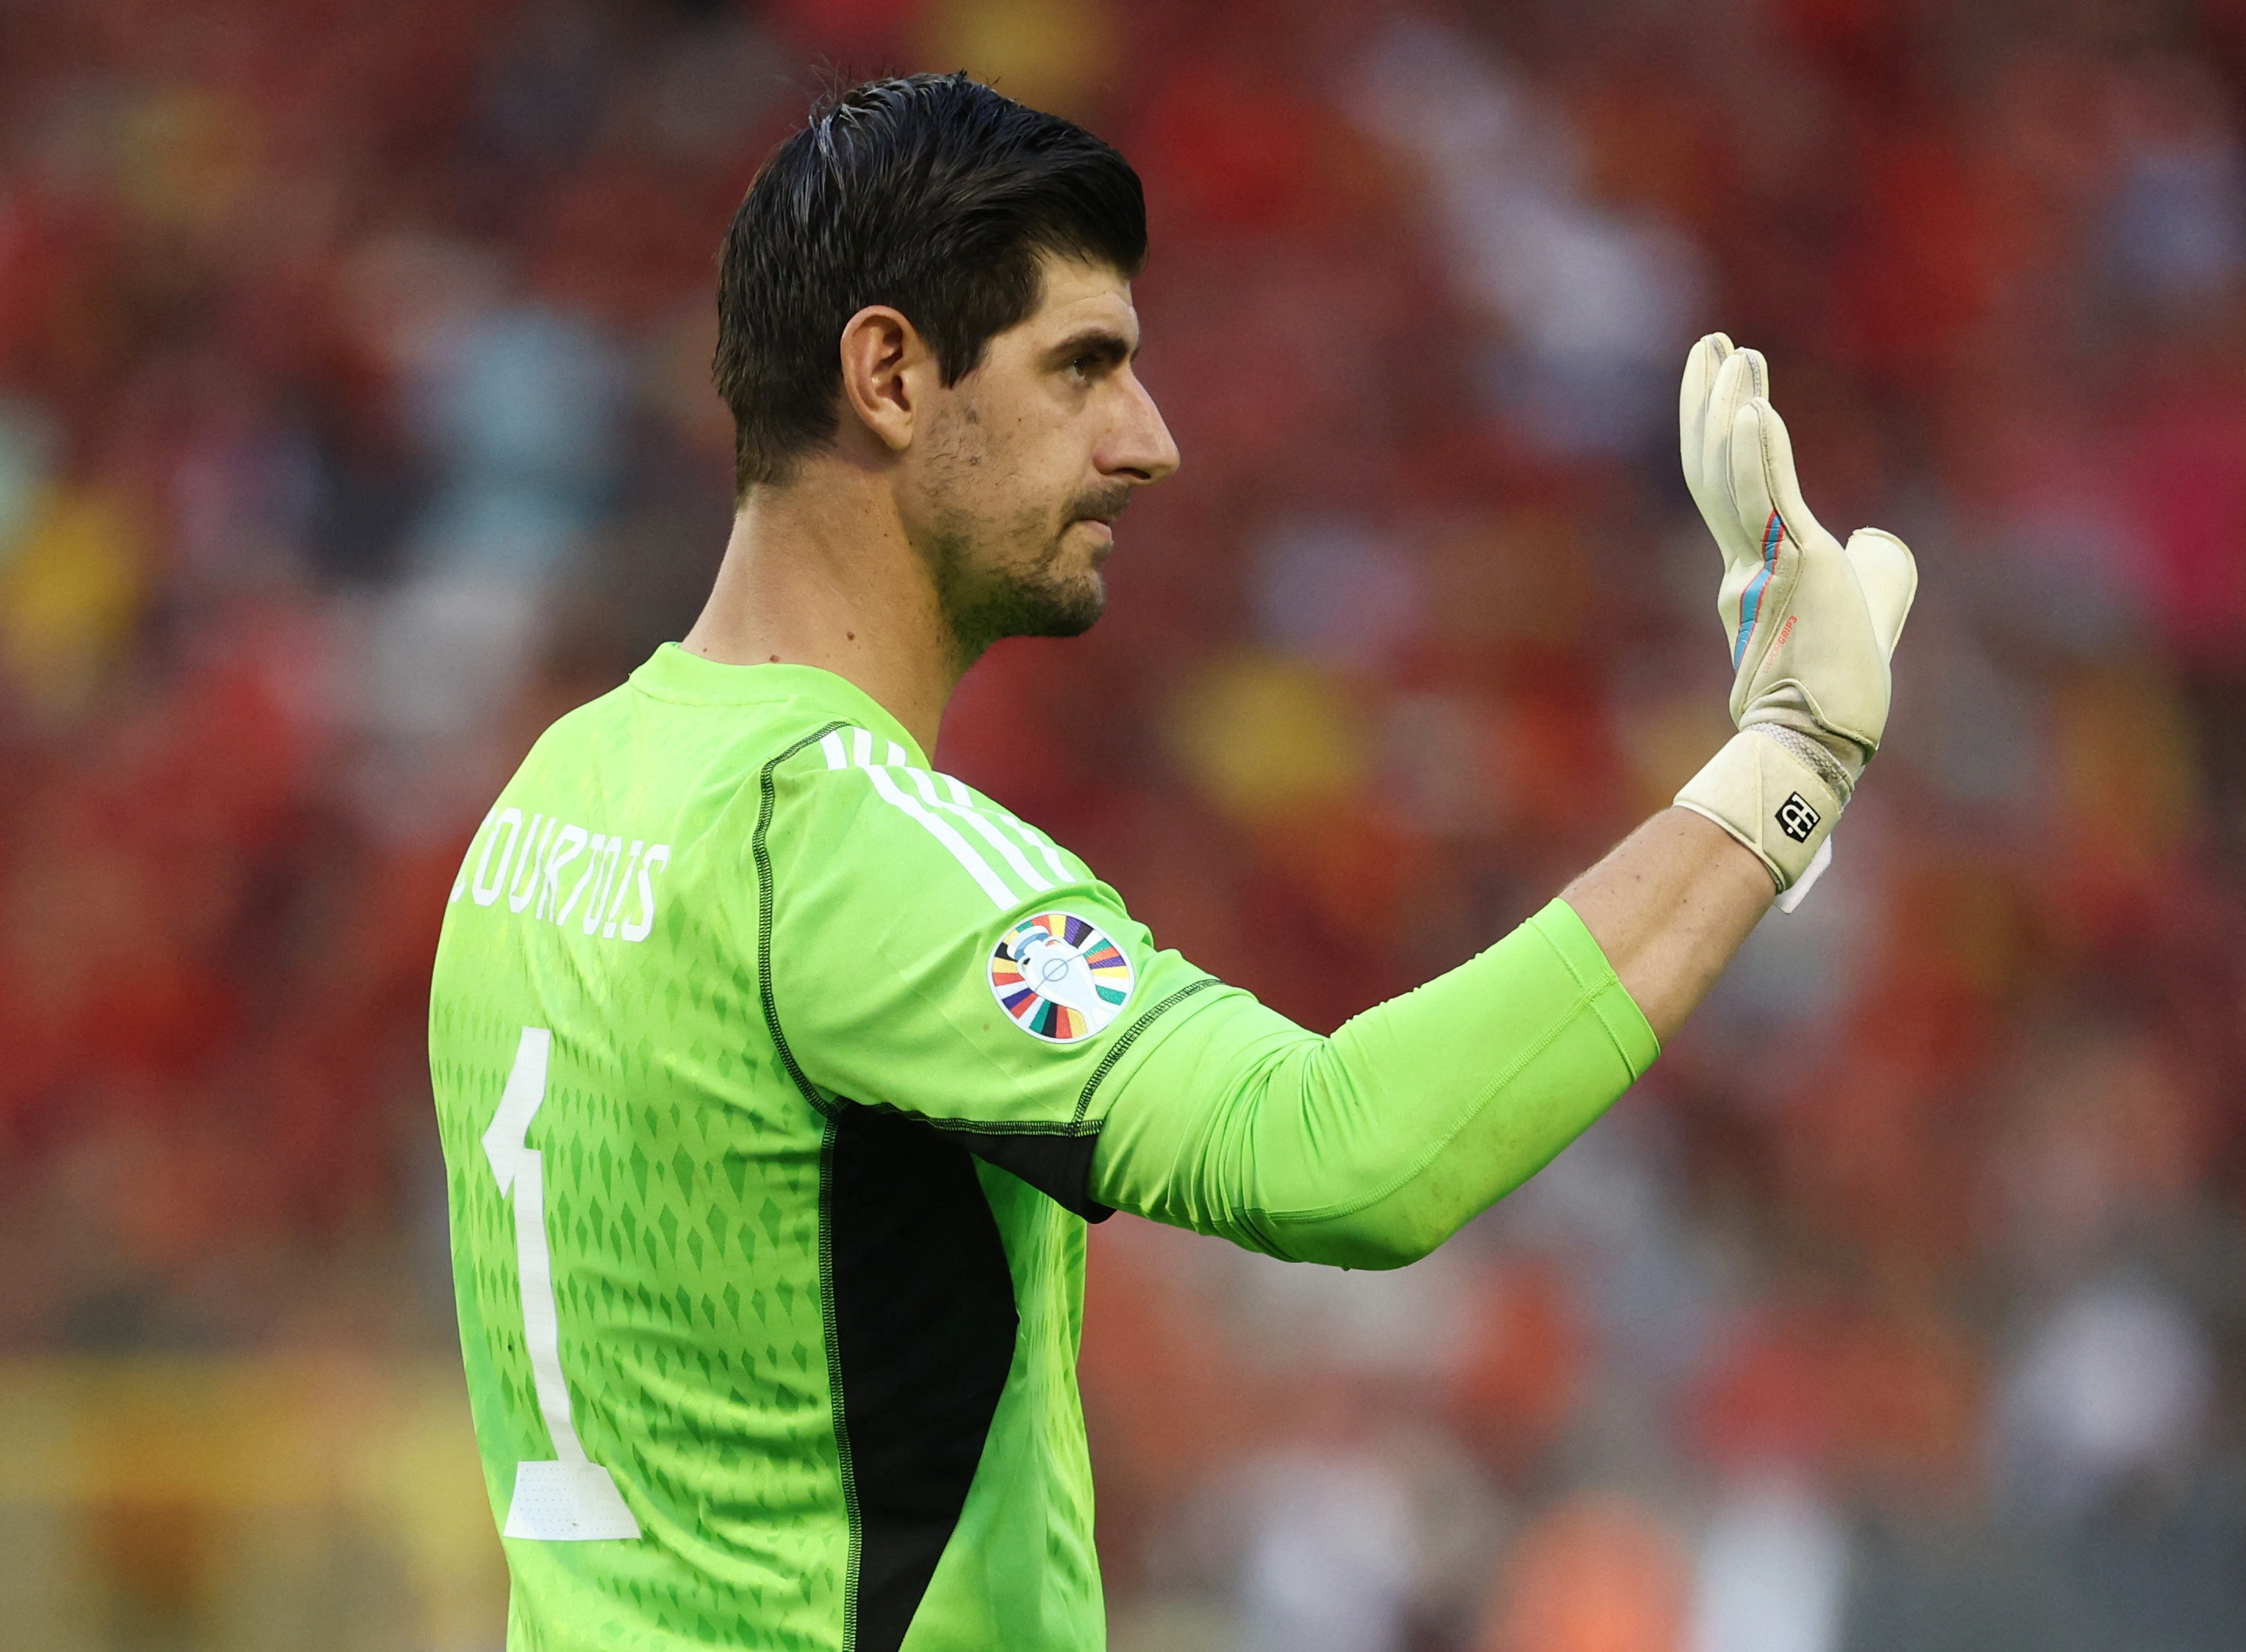 Belgium's Courtois 'deeply disappointed' by Tedesco's remarks | Reuters